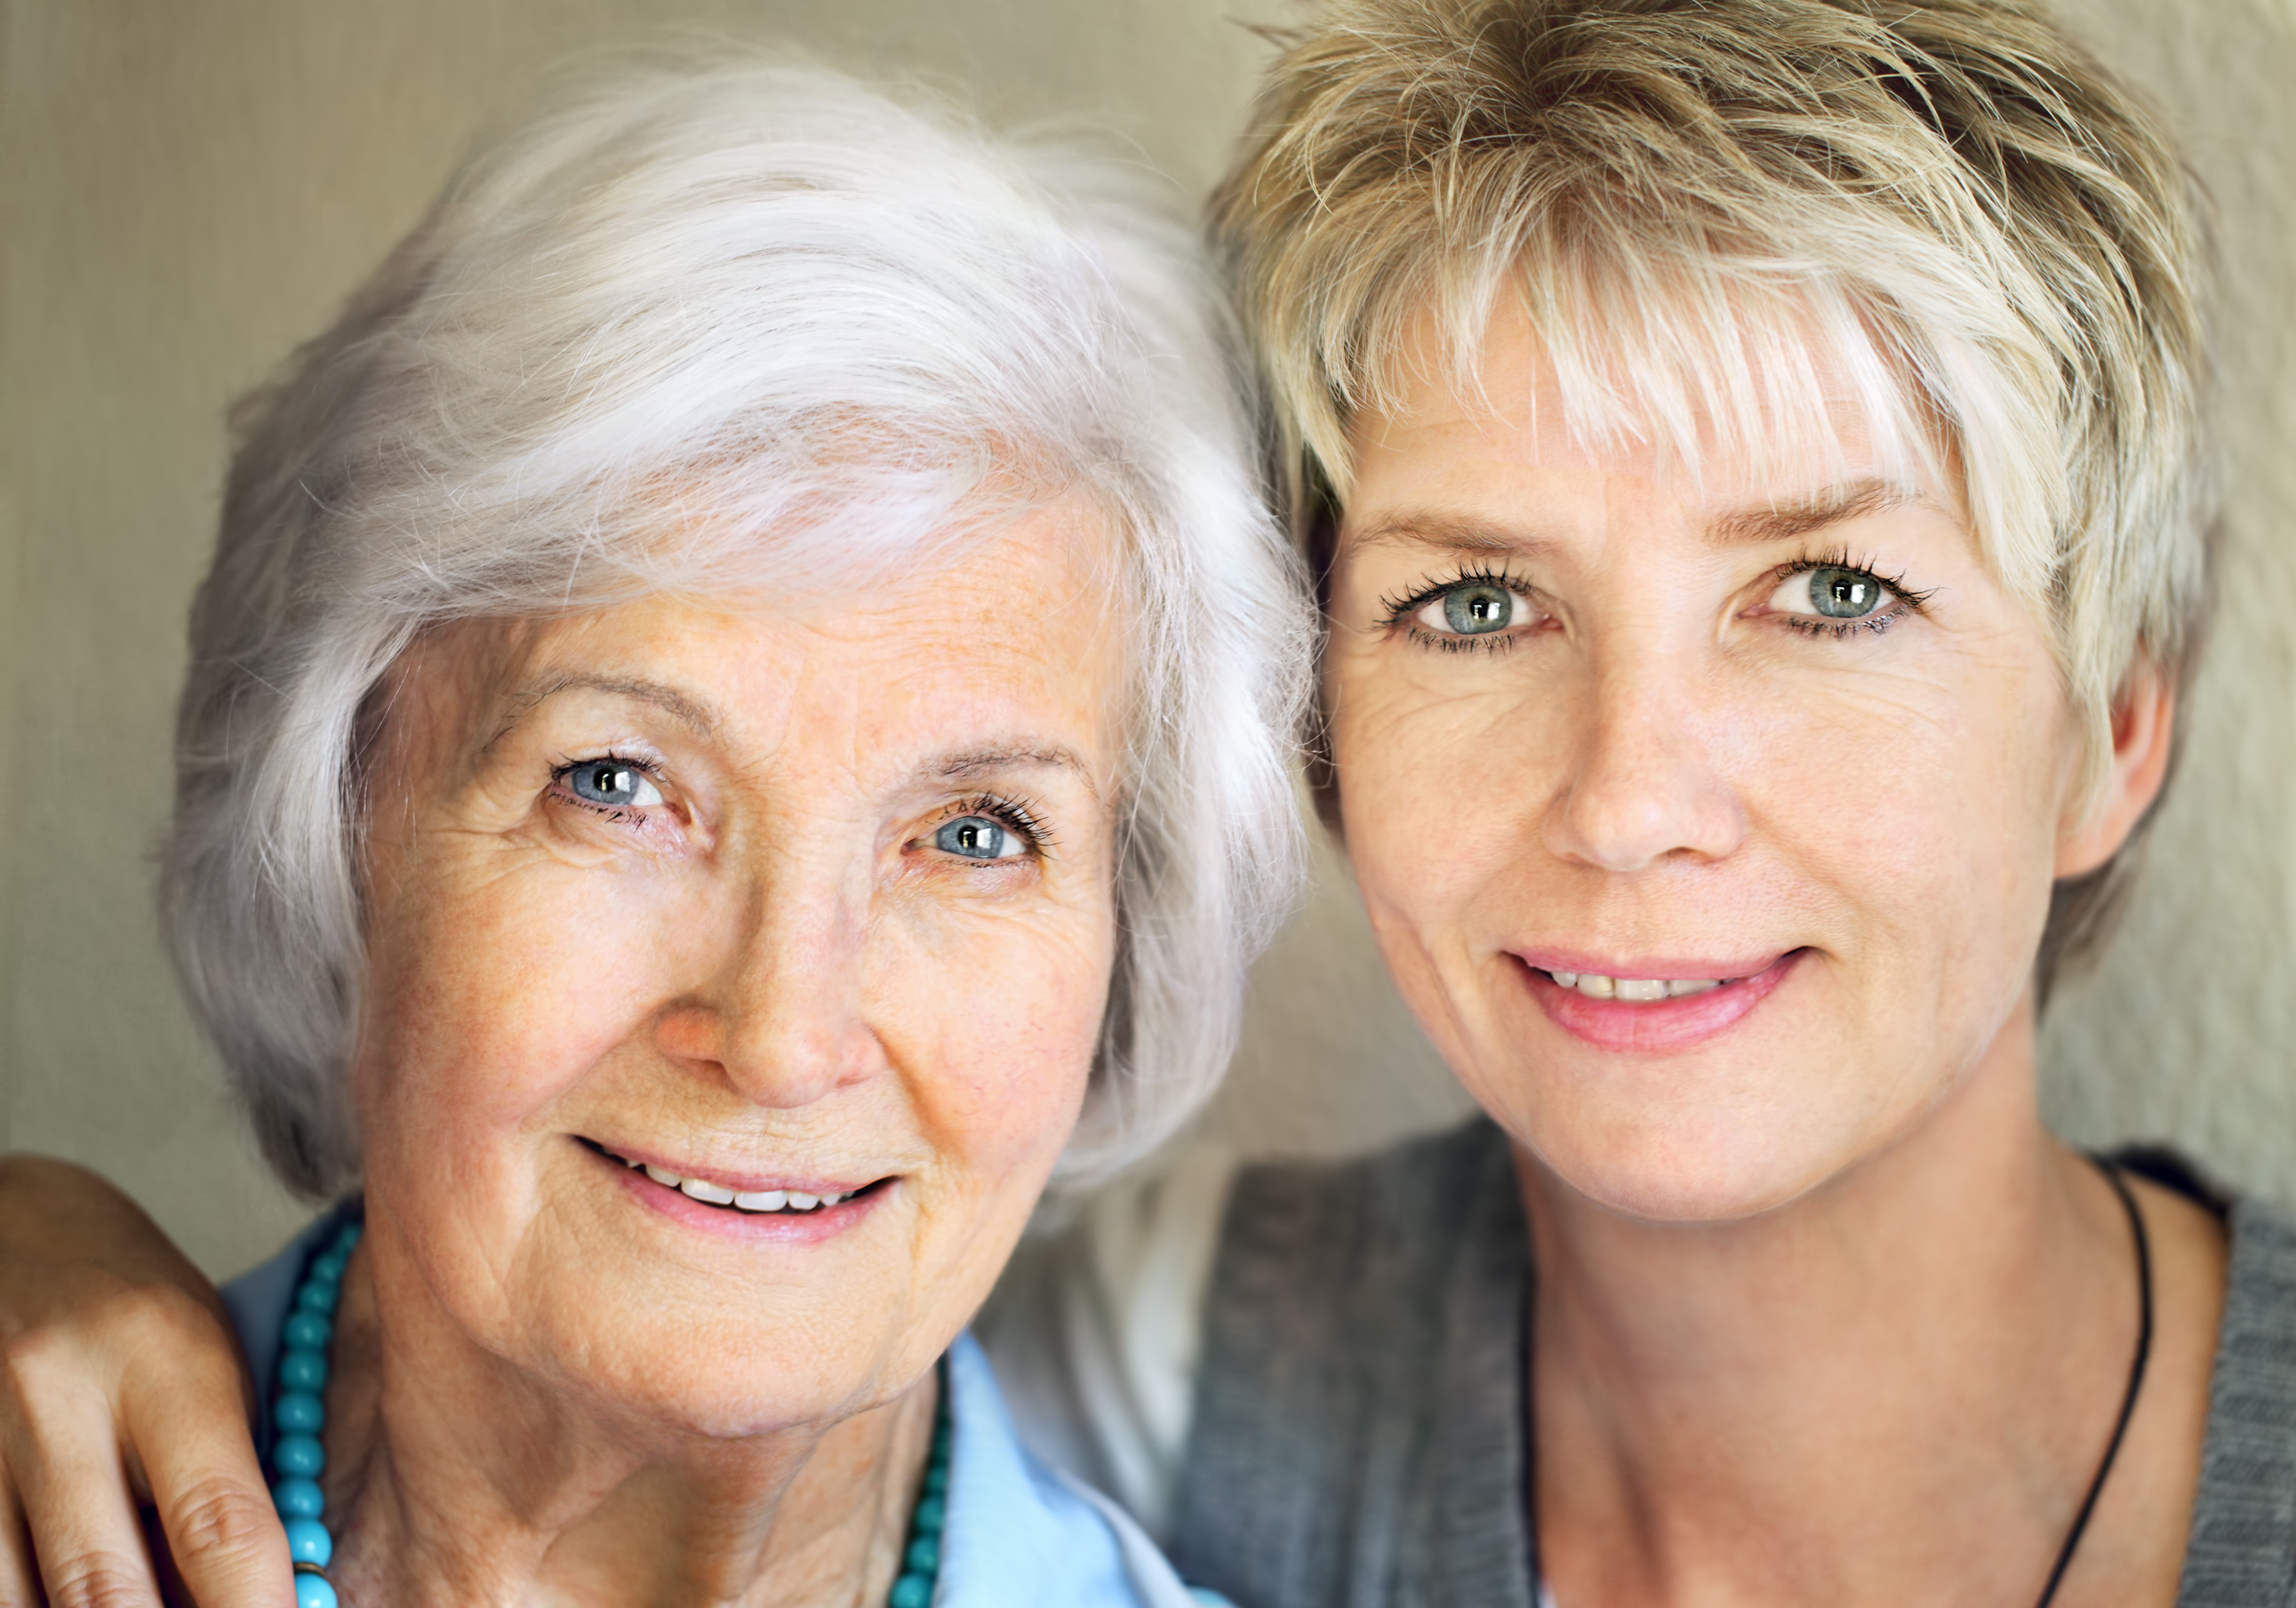 Senior mother and mature daughter portrait, 25 years between them